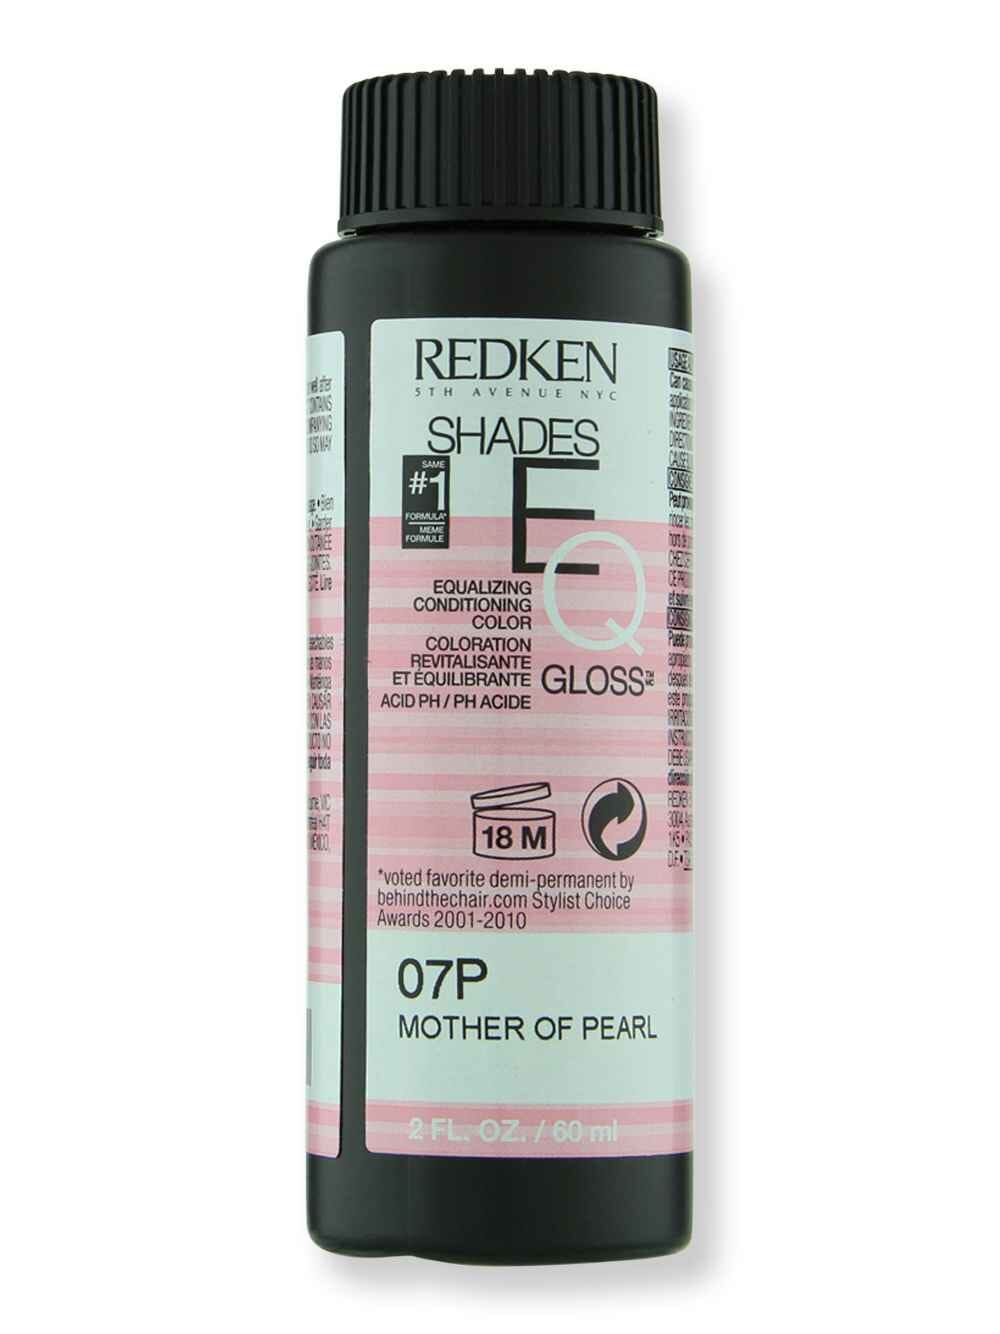 Redken Redken Shades EQ Gloss 2 oz60 ml07P Mother of Pearl Hair Color 